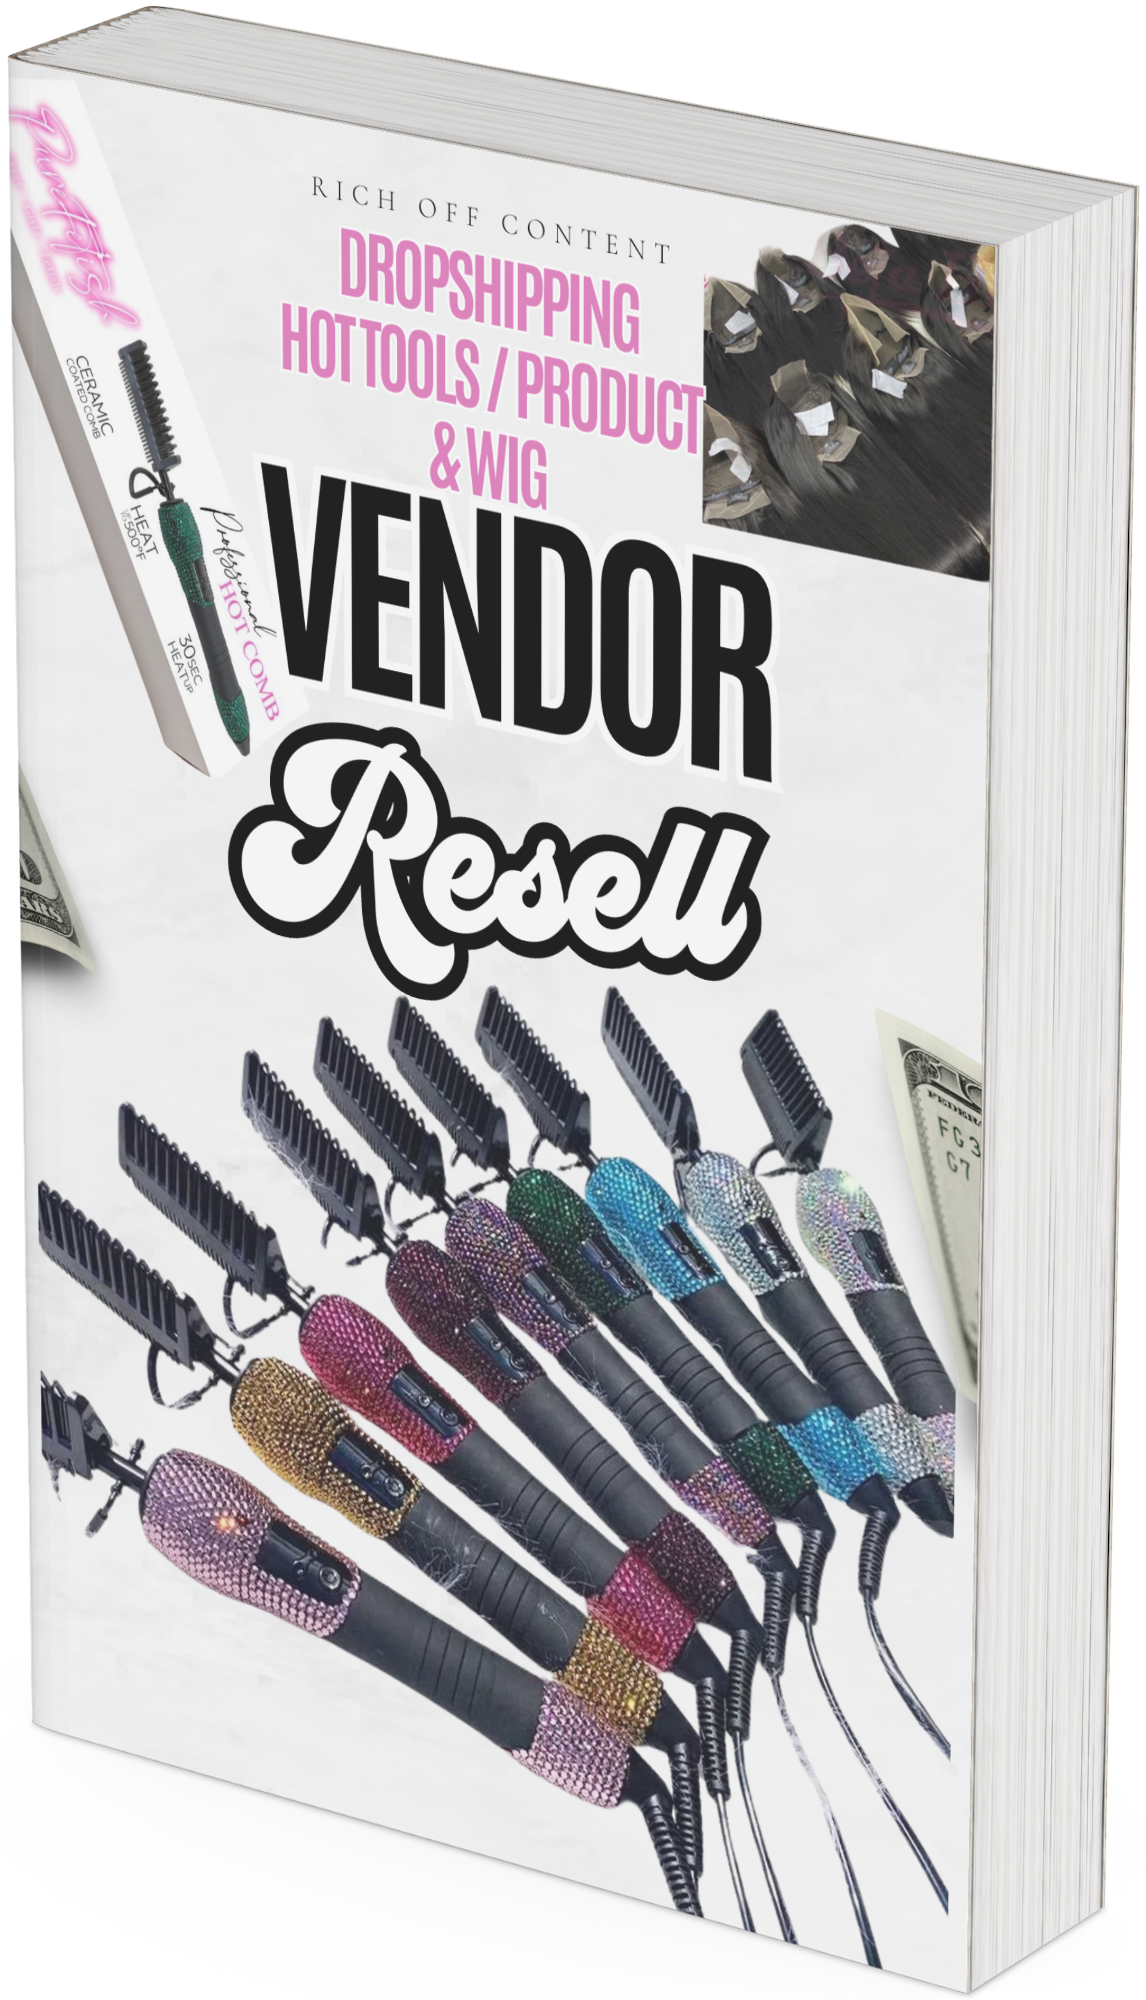 DROPSHIPPING ALL IN 1 VENDOR  (RESELL RIGHTS) E-BOOK